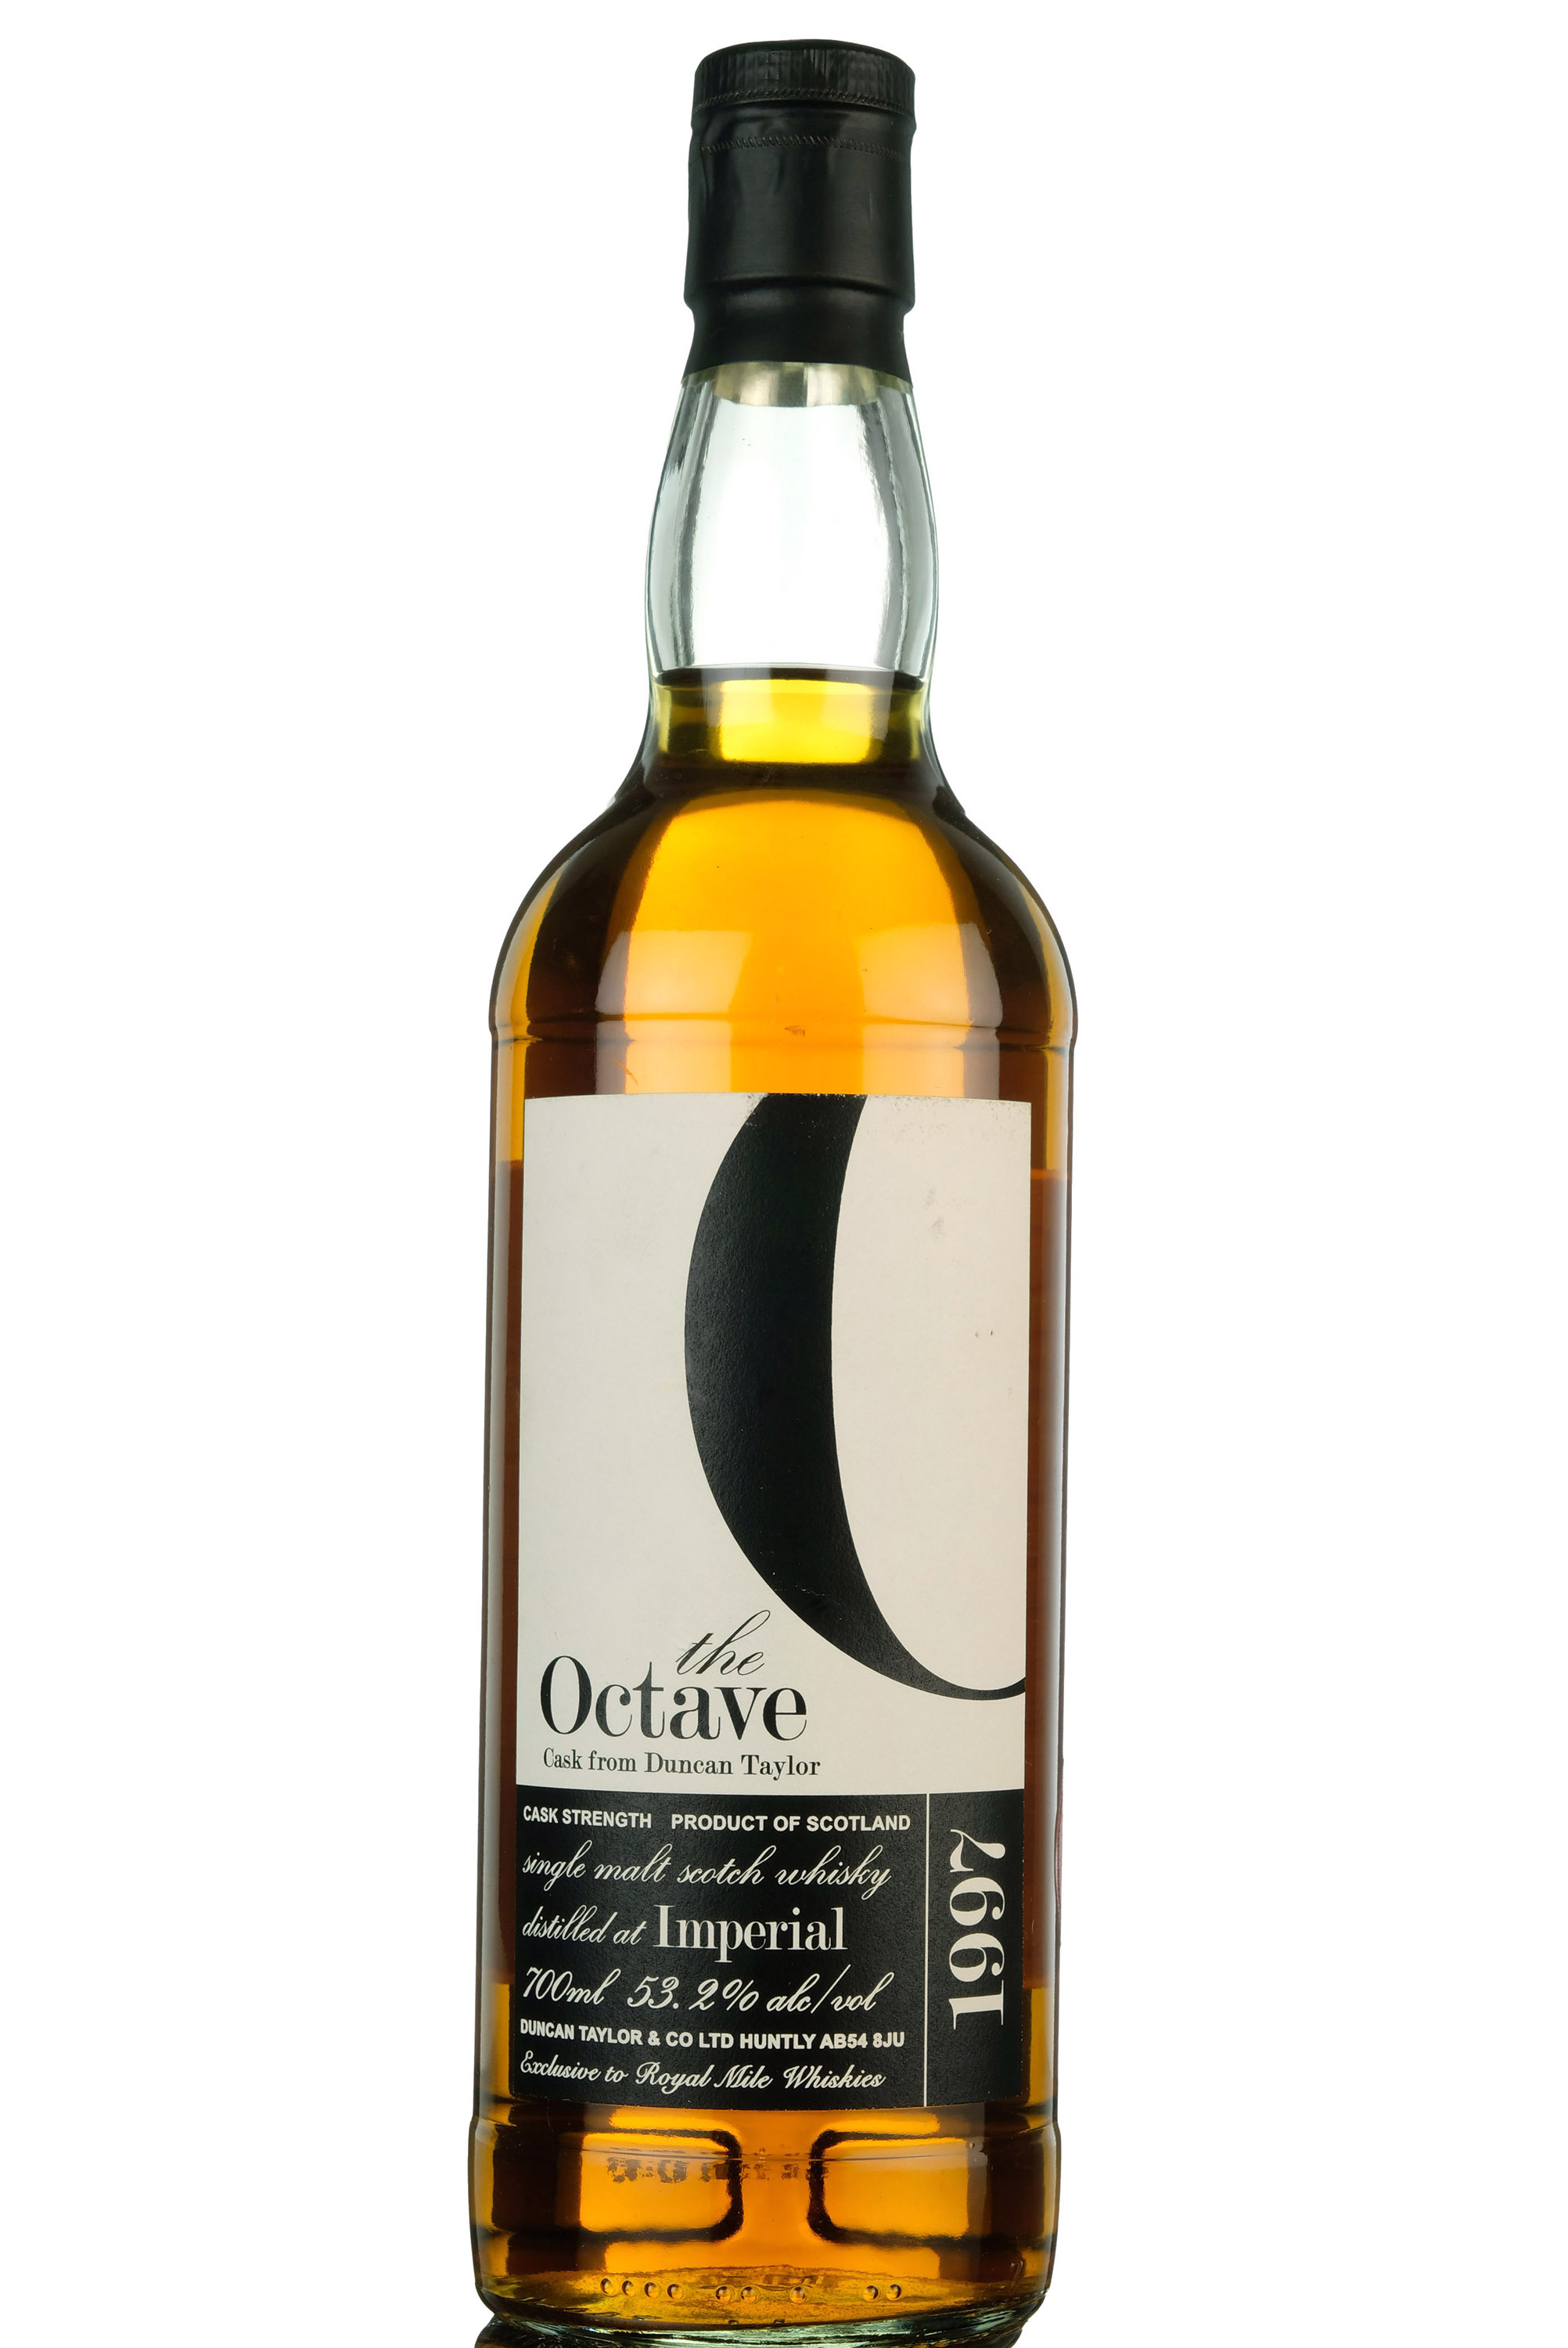 Imperial 1997-2010 - 13 Year Old - Duncan Taylor - Octave - Single Cask 510663 - Royal Mil